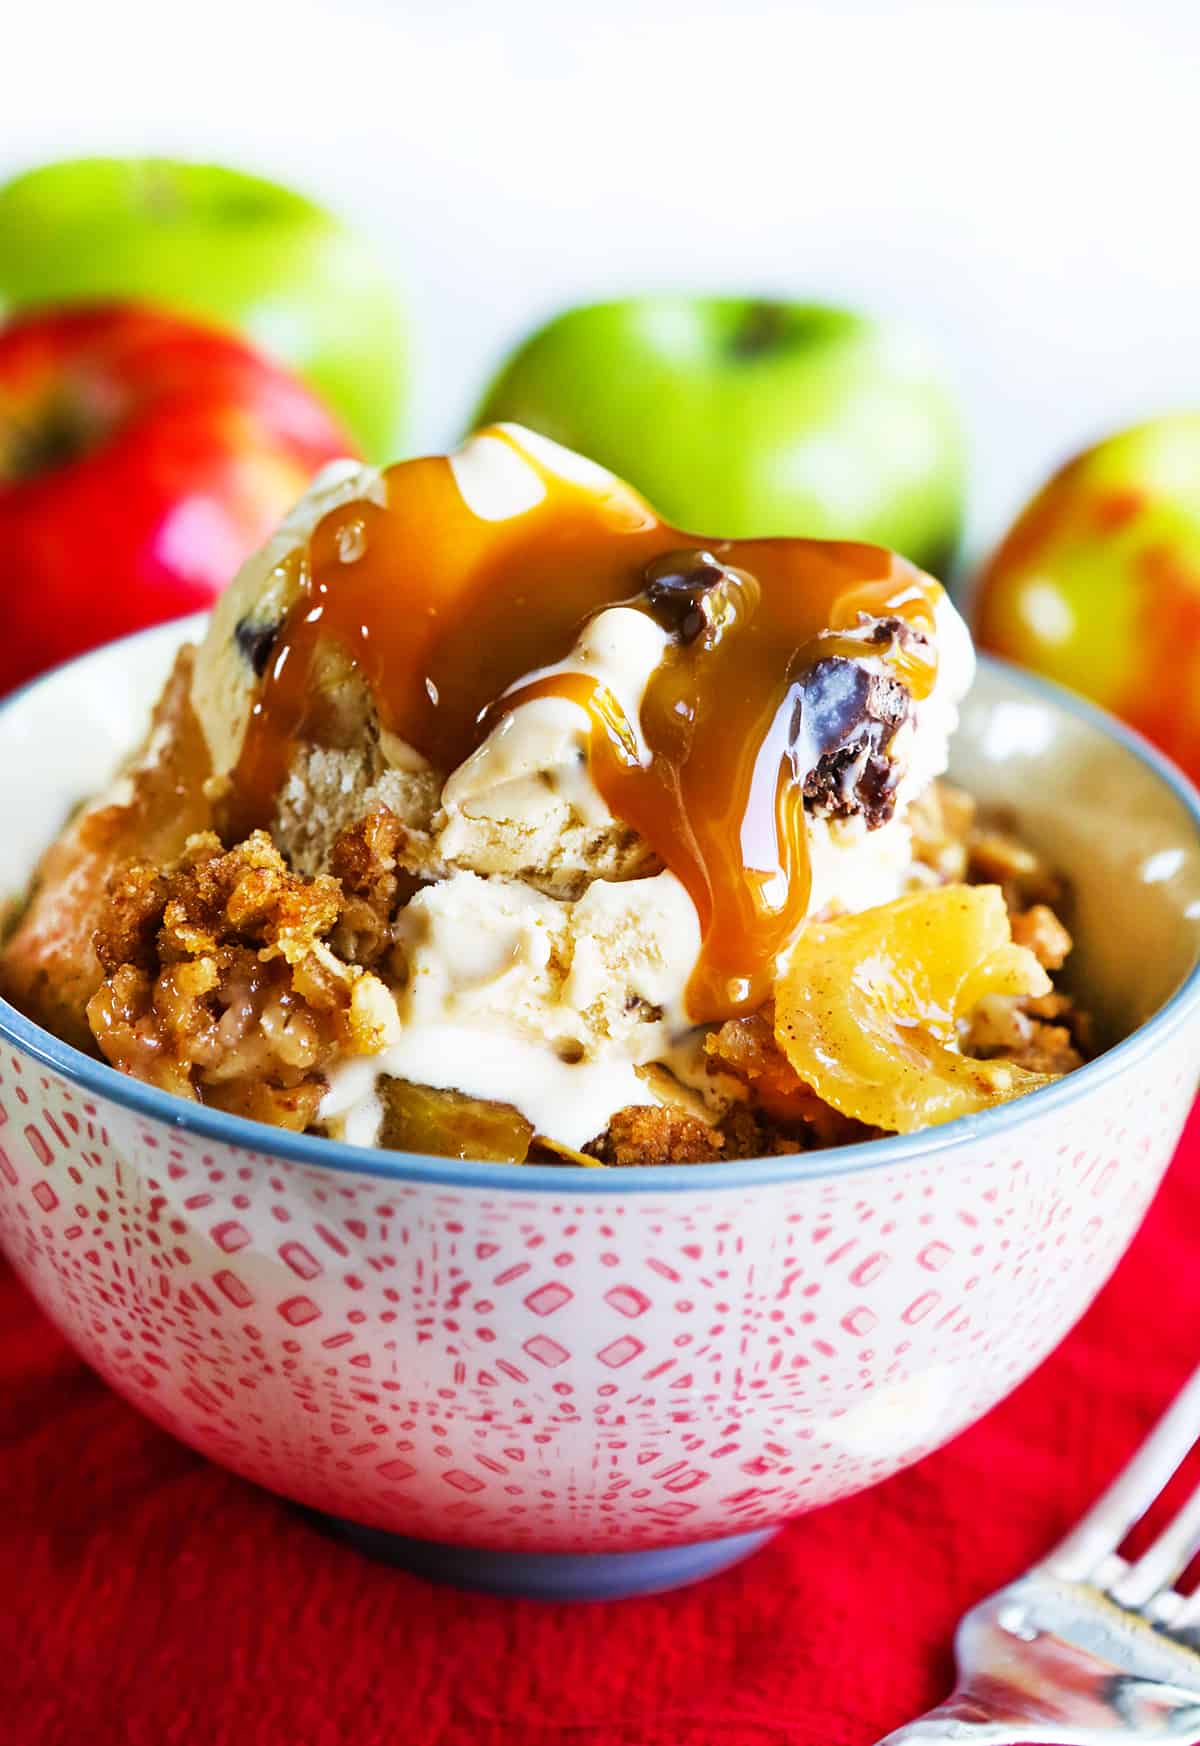 caramel oozing down a serving of classic apple crisp and vanilla ice cream.